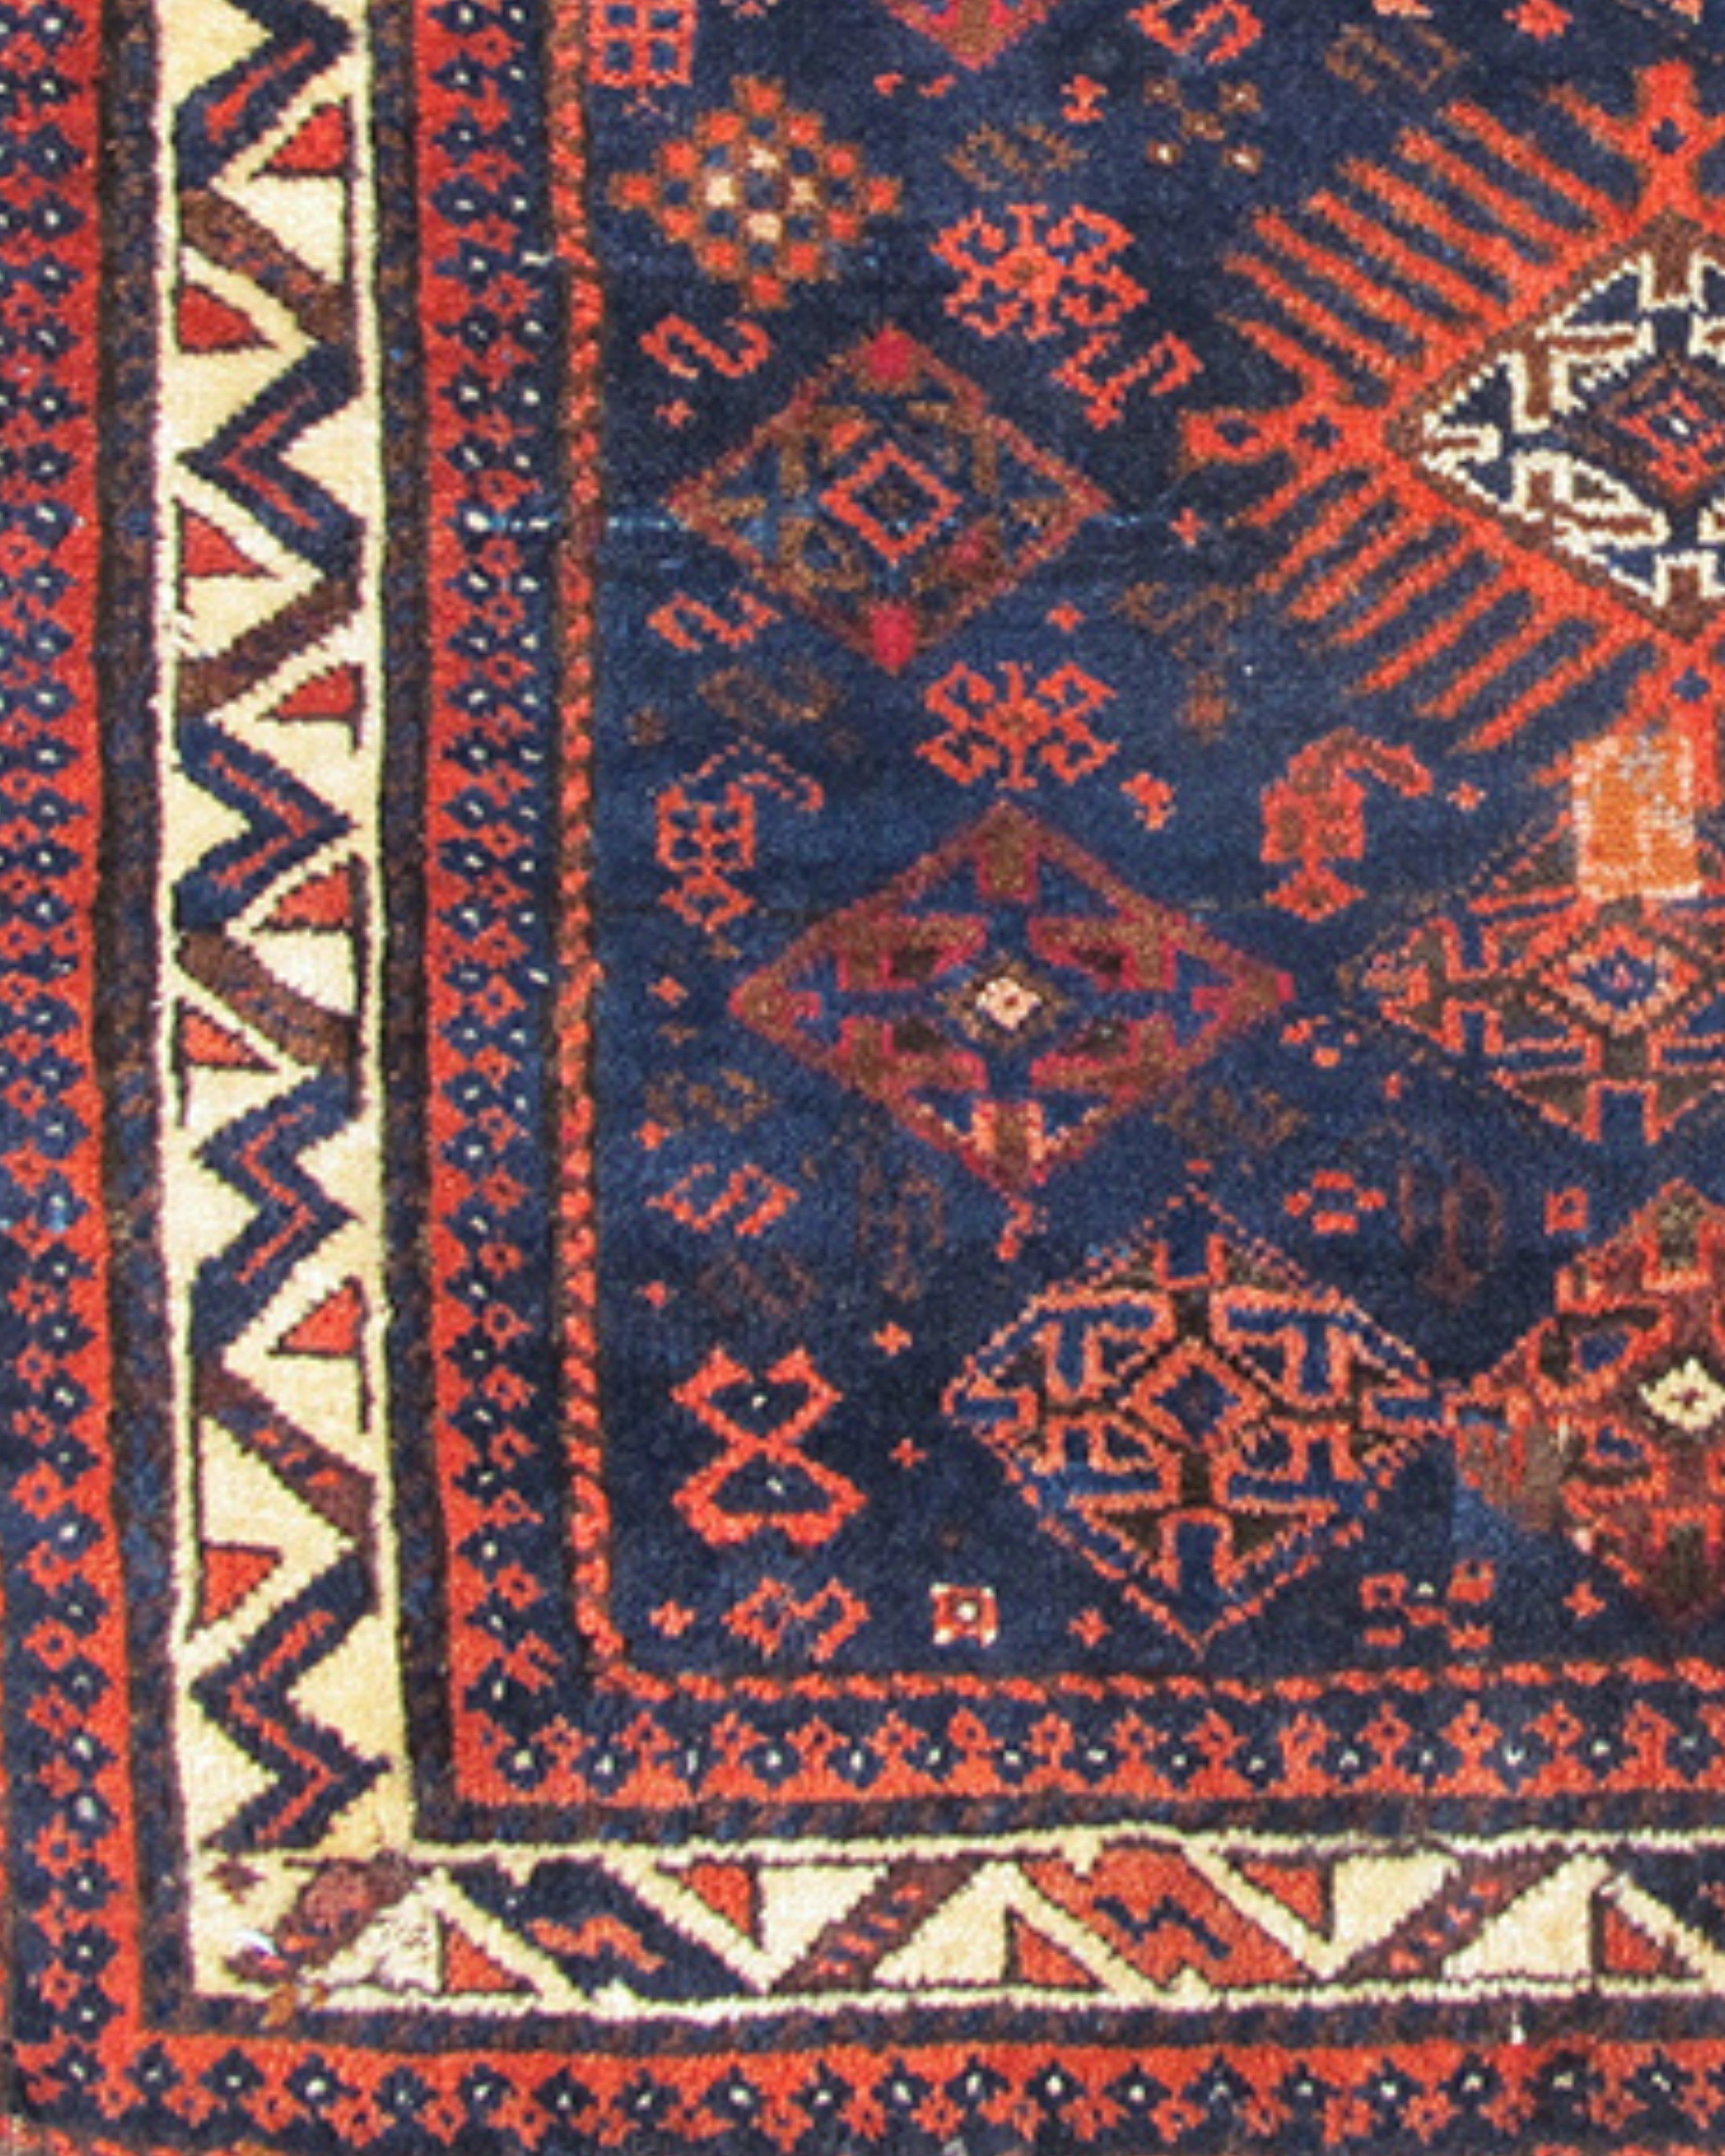 Antique Persian Baluch Bagface Rug, Late 19th Century

Additional information: 
Dimension: 2'9